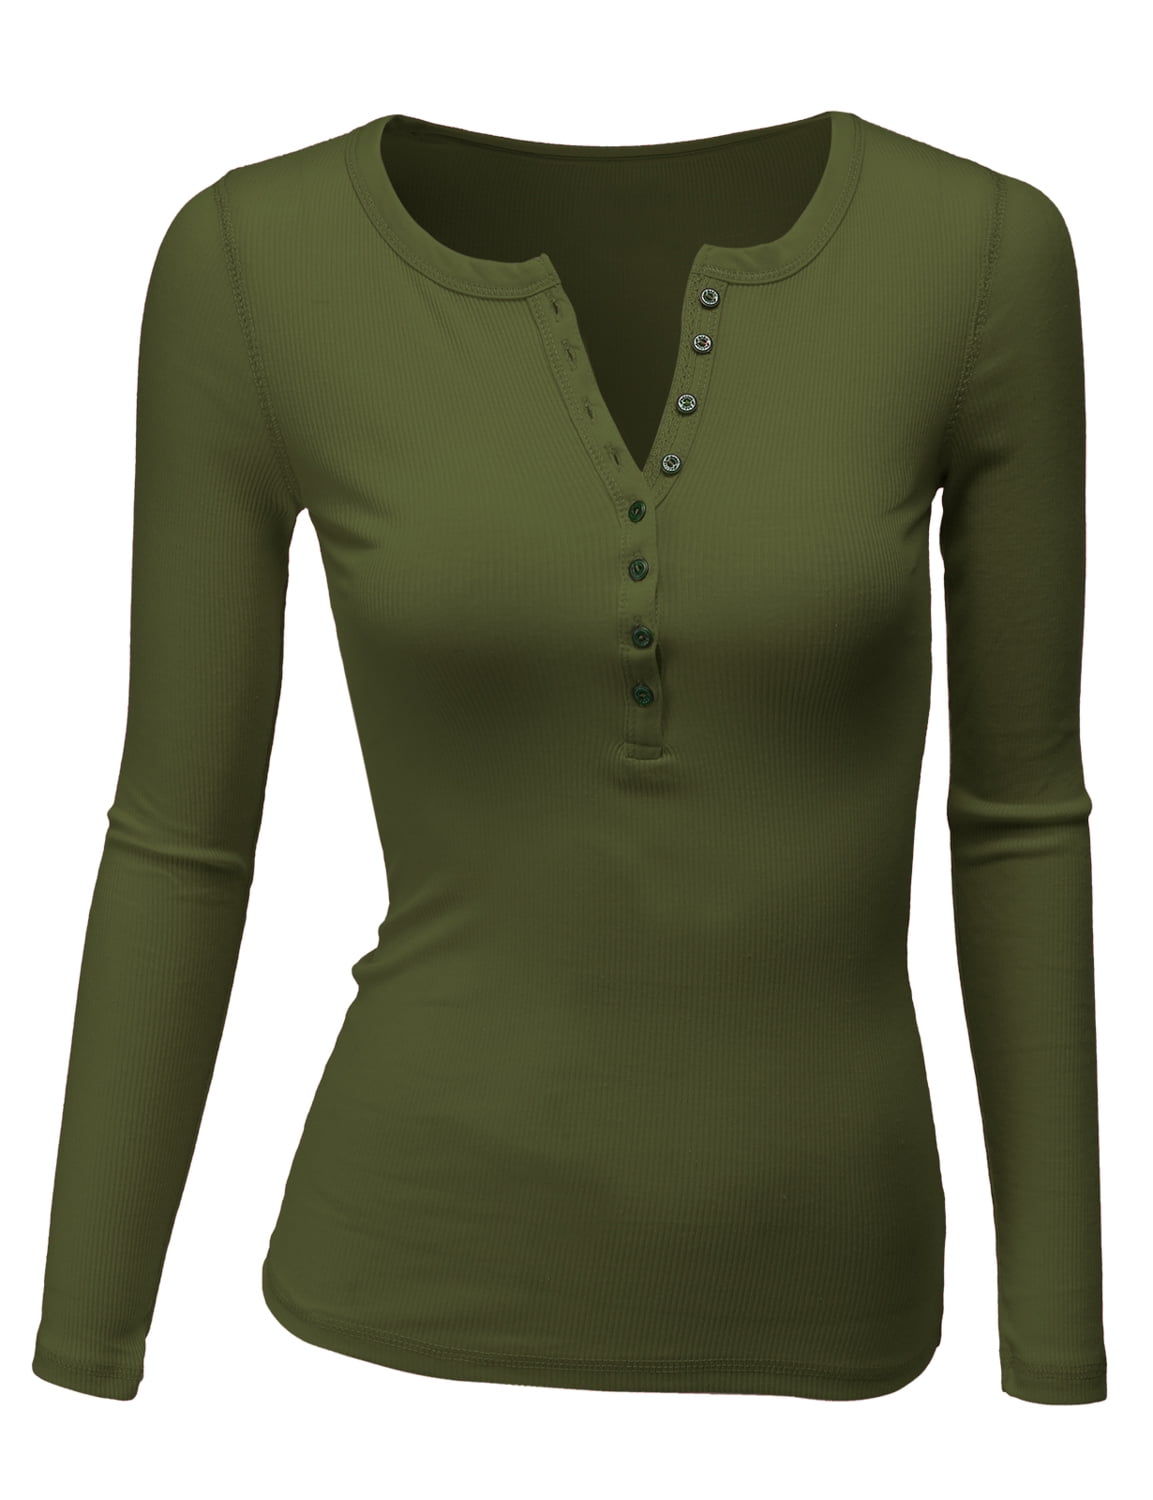 Doublju Women's Thermal Henley Long Sleeve Top with Plus Size